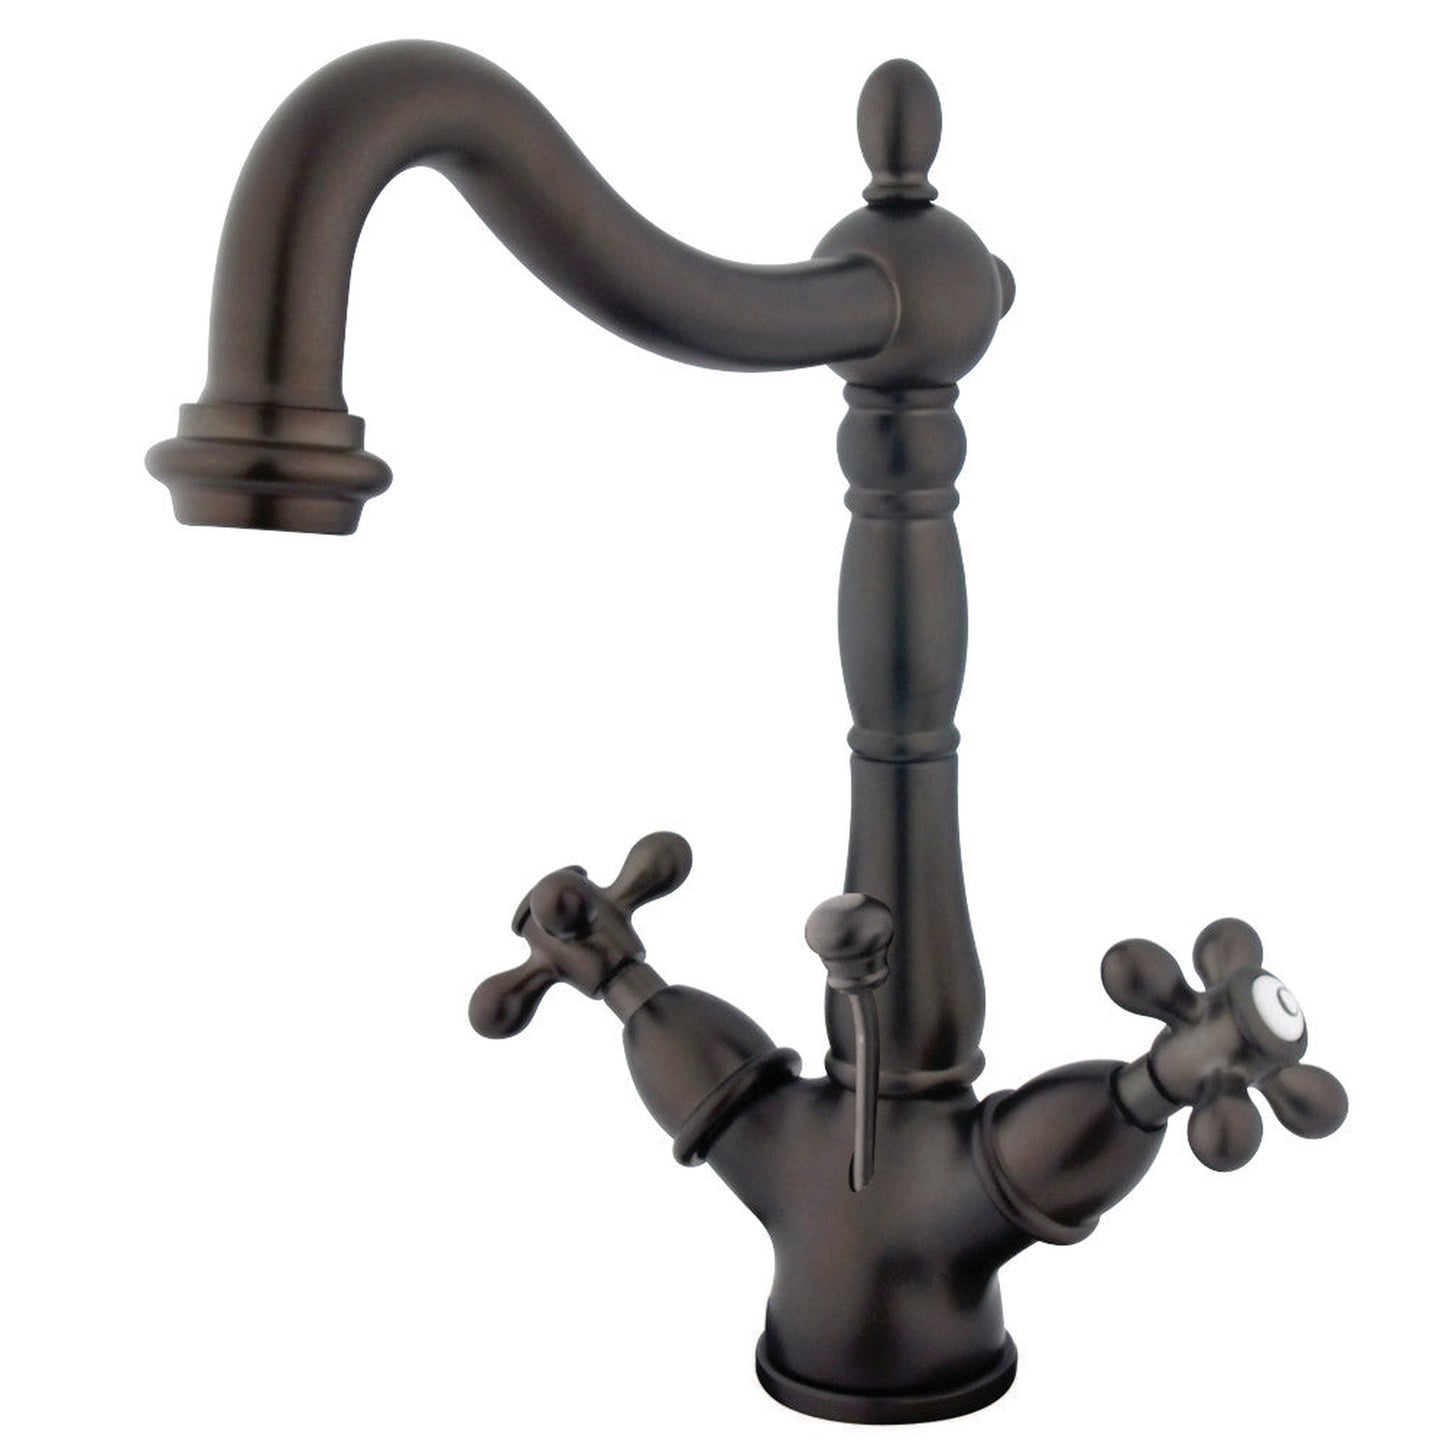 Kingston Brass KS1435AX Heritage Two-Handle Bathroom Faucet with Brass Pop-Up and Cover Plate, Oil Rubbed Bronze